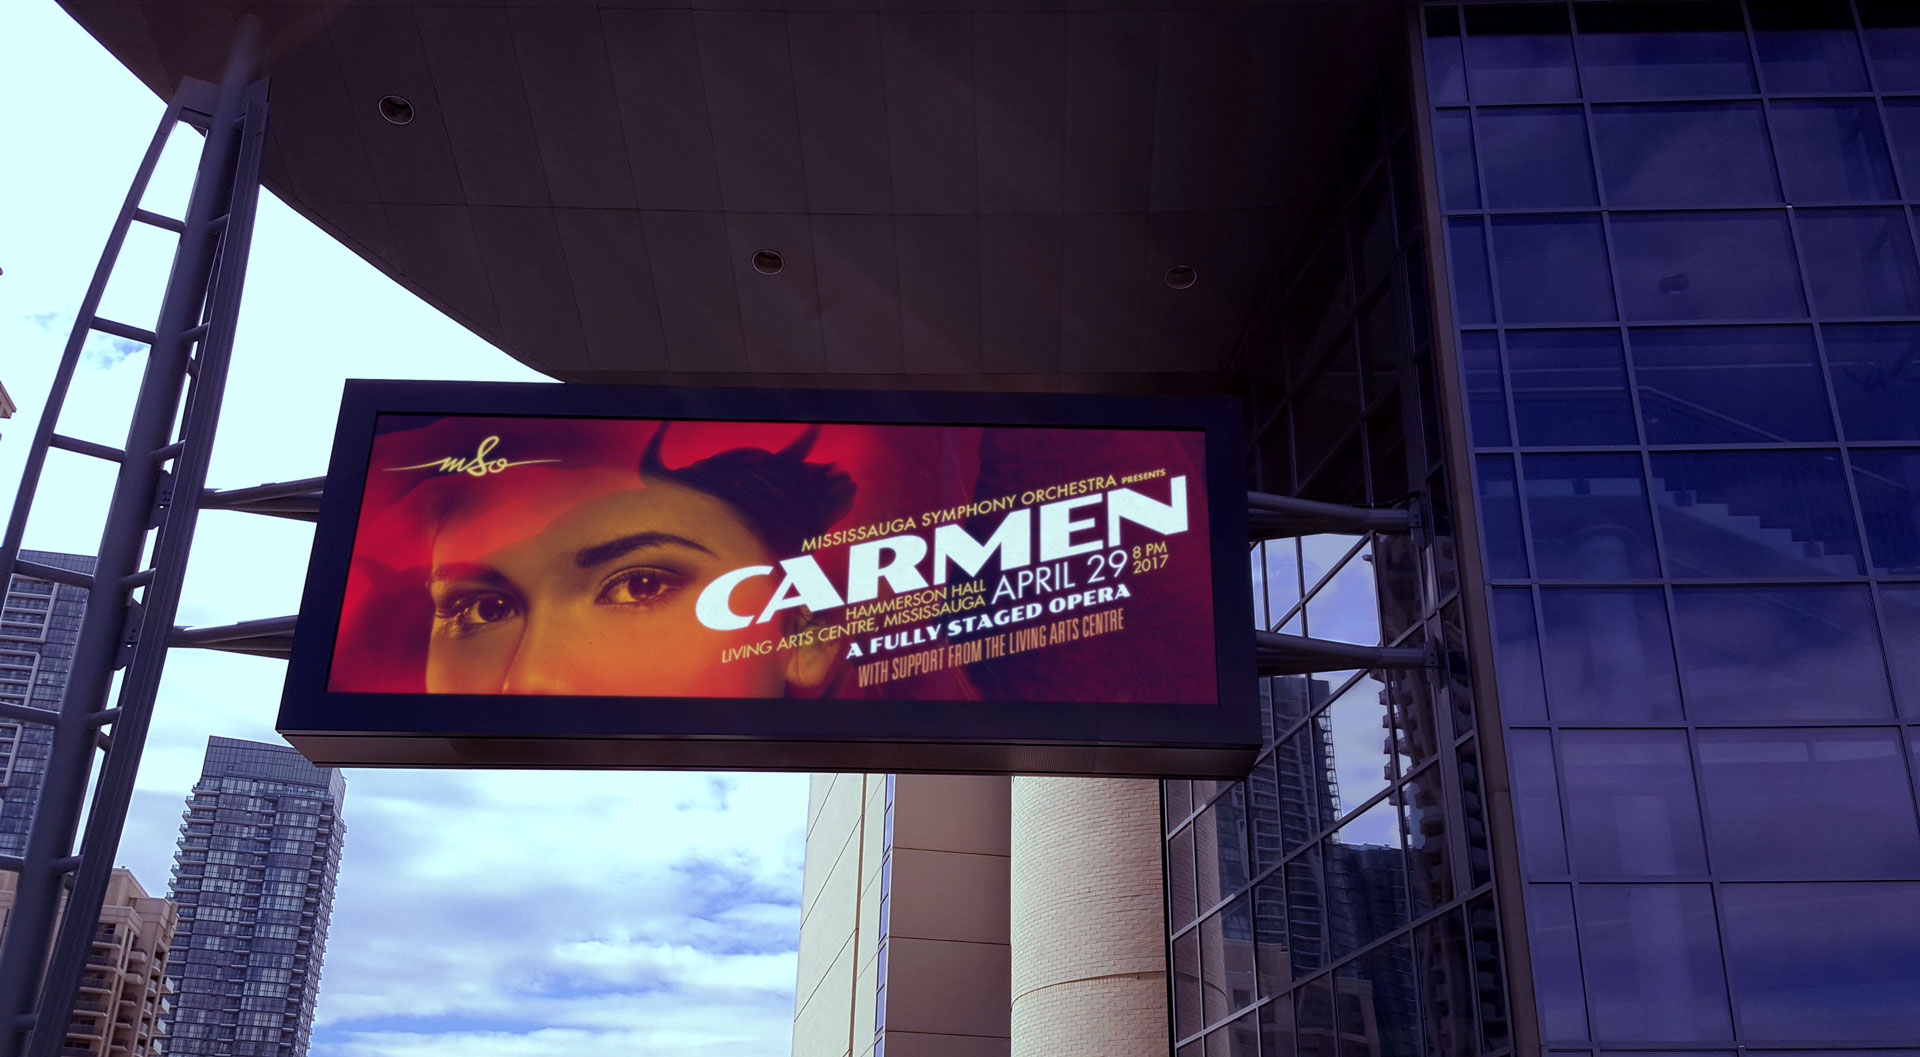 Carmen poster on display on outdoor screen